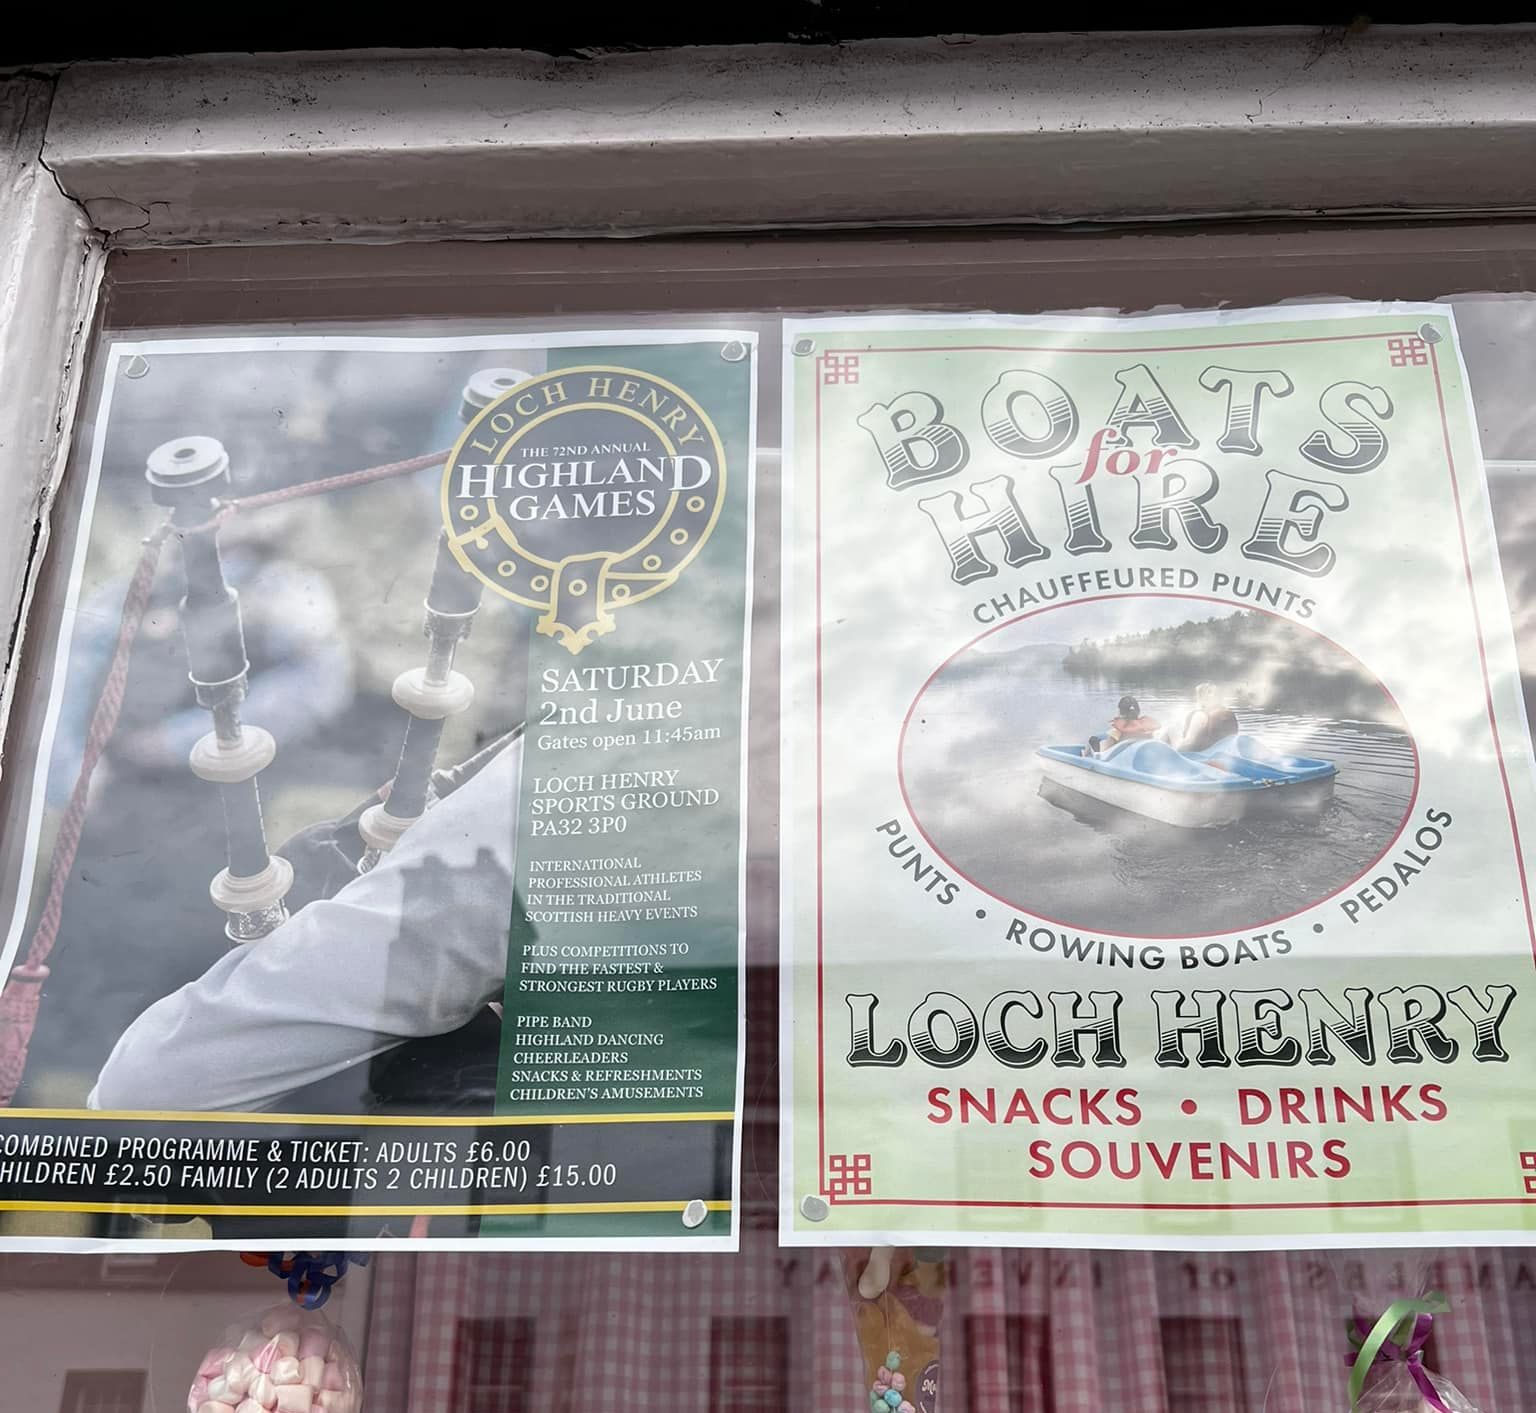 Pamphlets advertising 'Loch Henry Boat Tours' were spotted. 